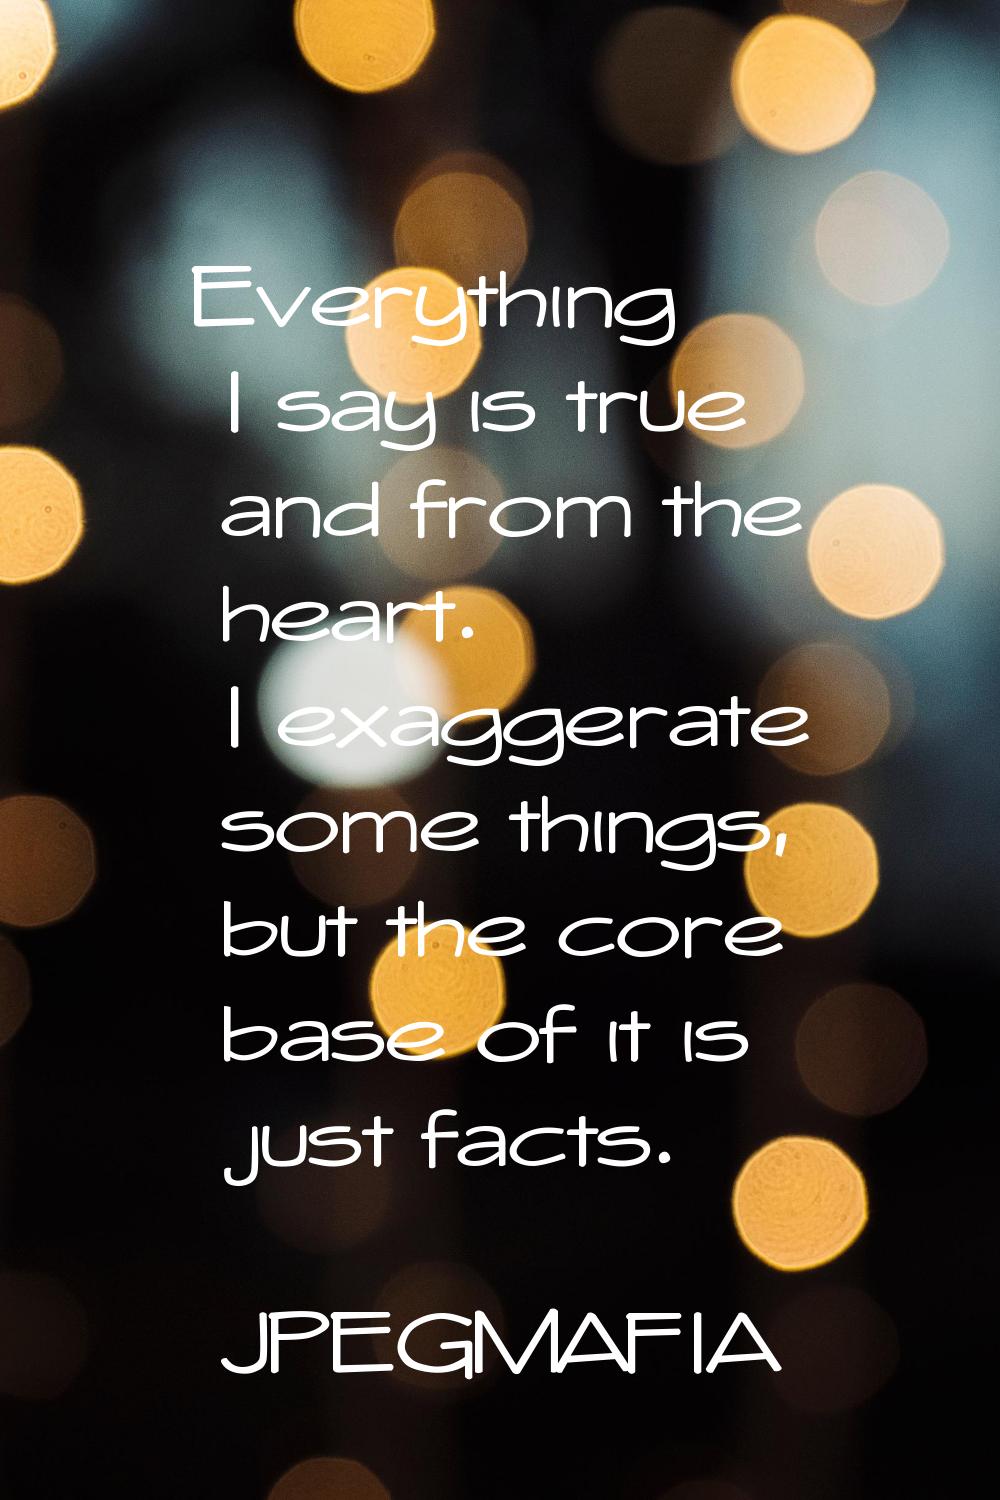 Everything I say is true and from the heart. I exaggerate some things, but the core base of it is j